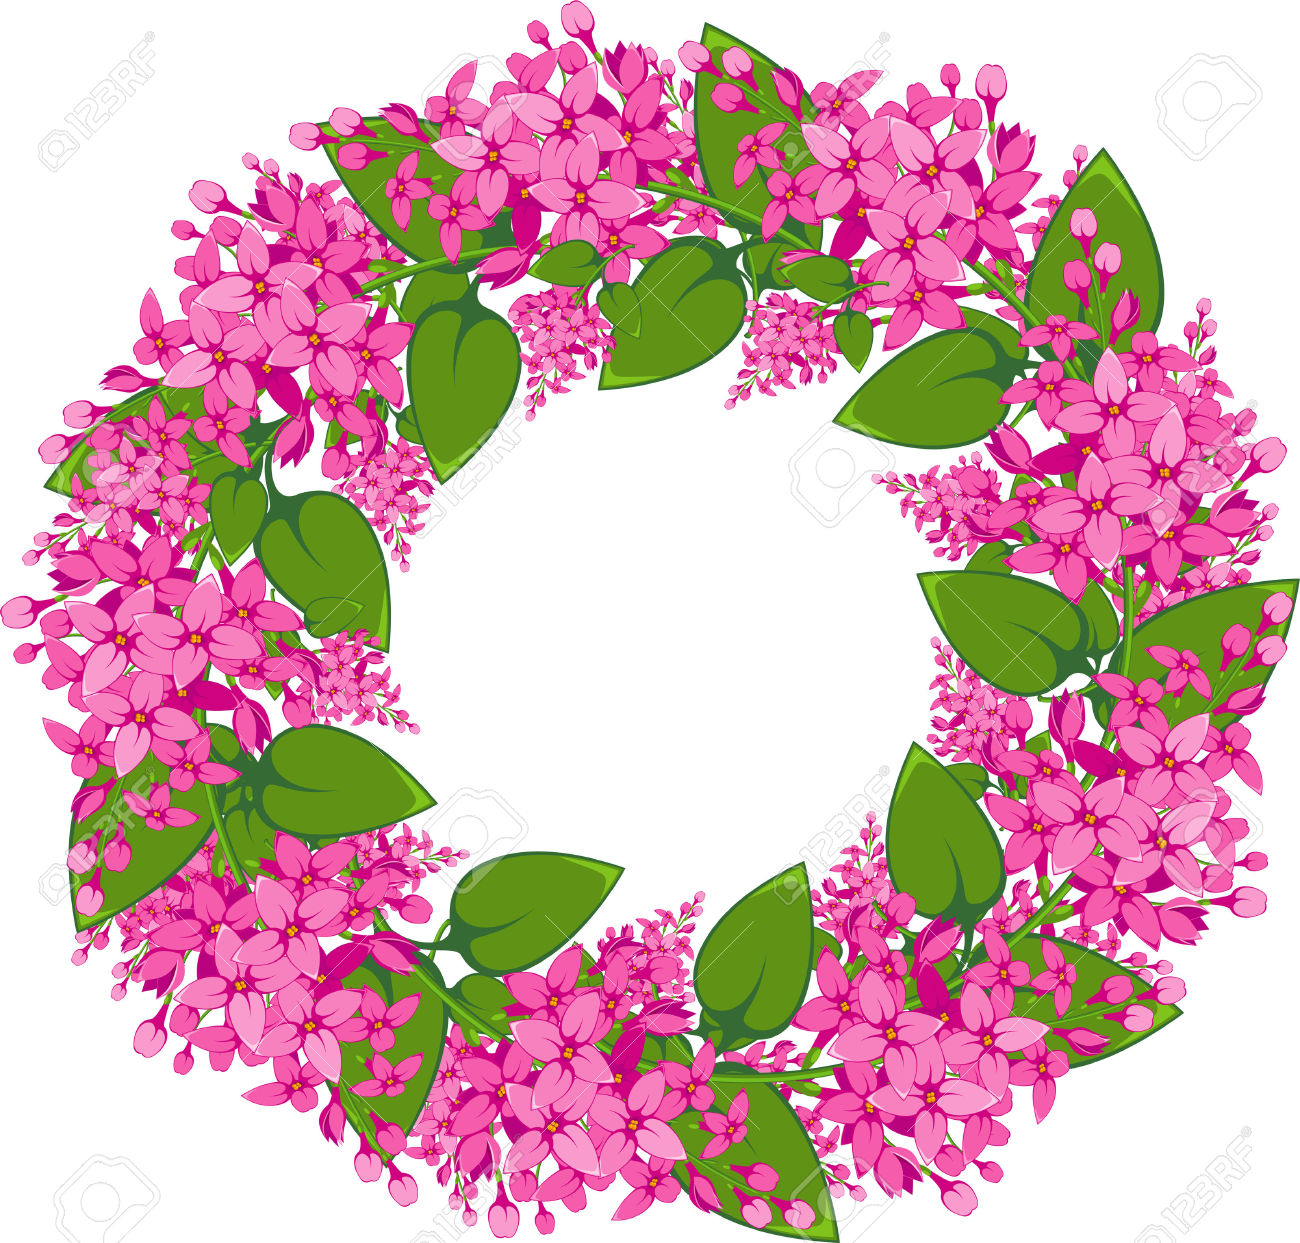 Wreath For Spring Clipart.